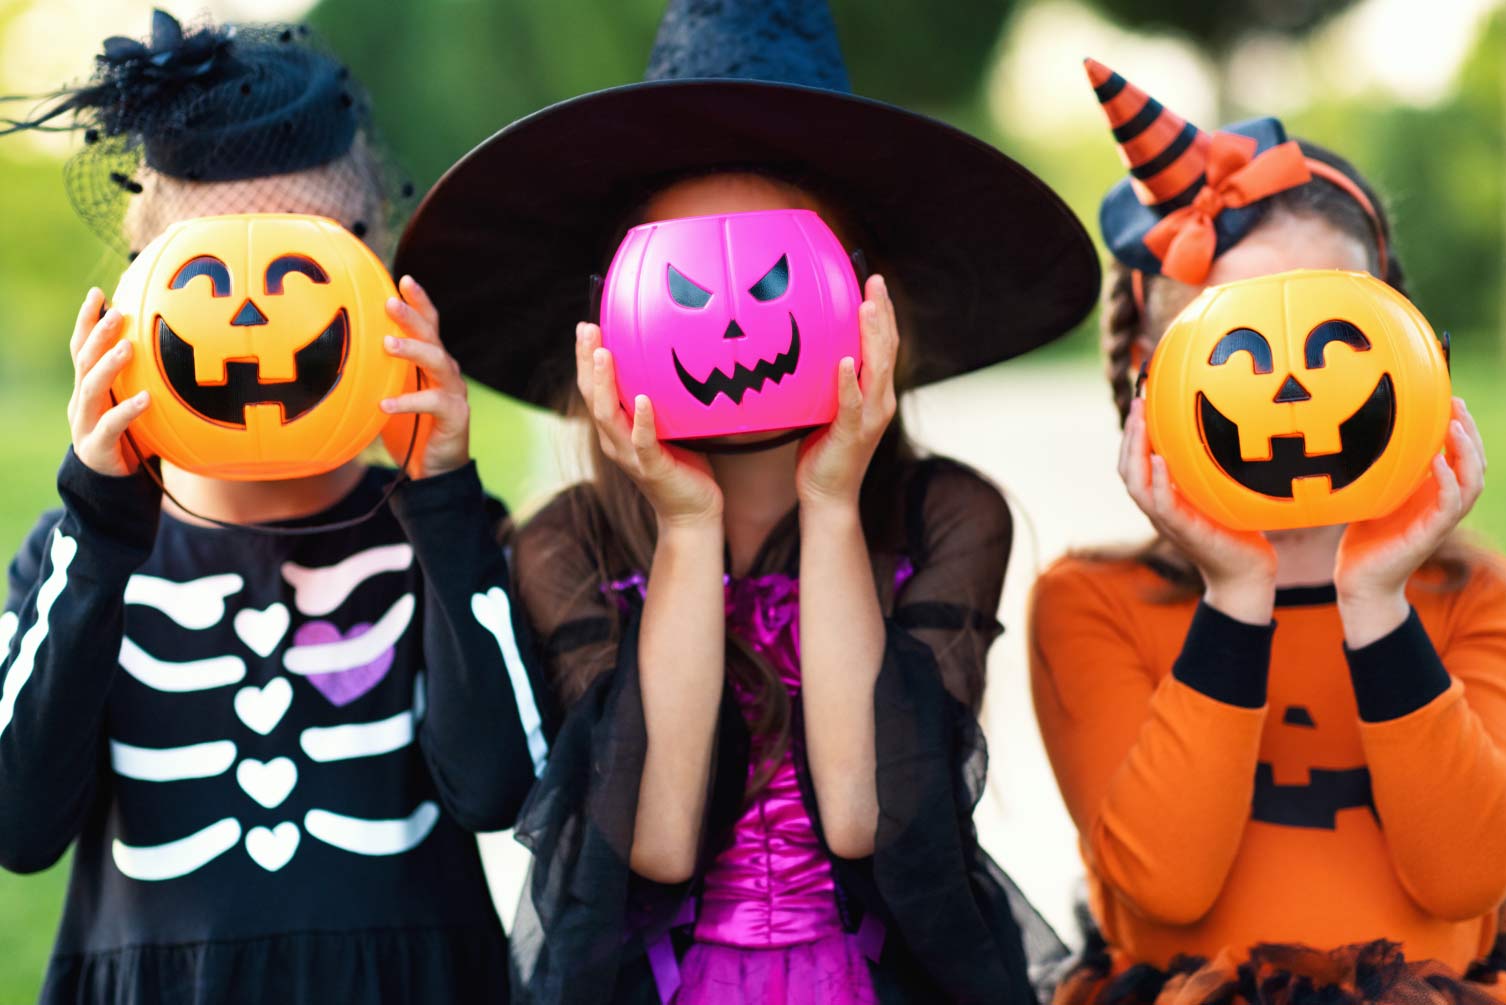 Kids dressed up for Halloween with pumpkins in front of their faces